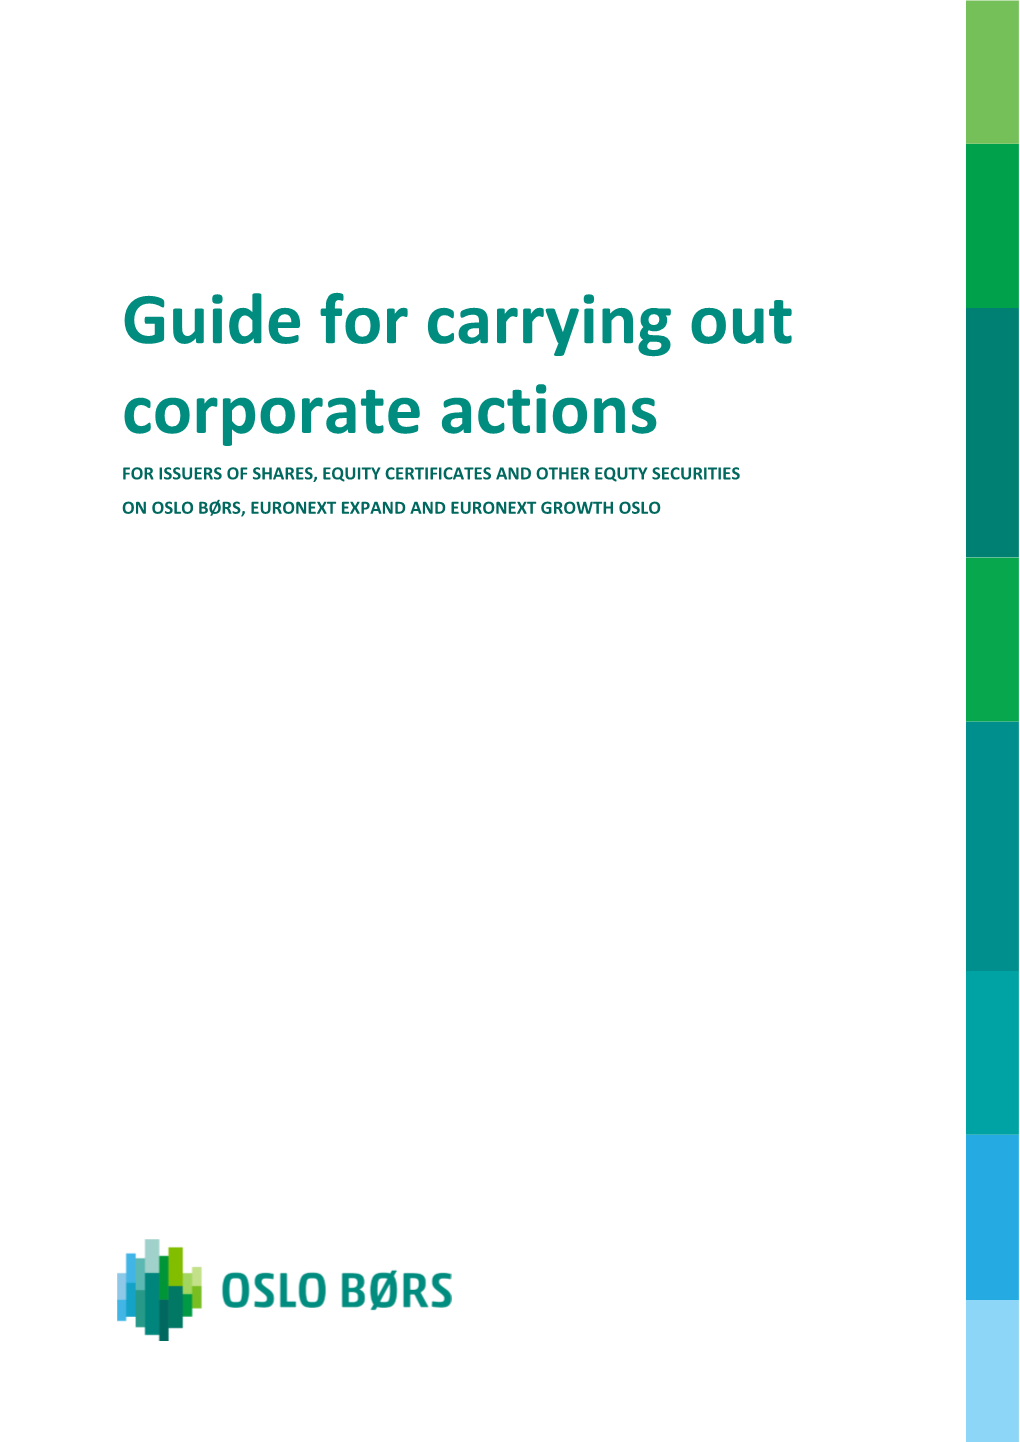 Guide for Corporate Actions